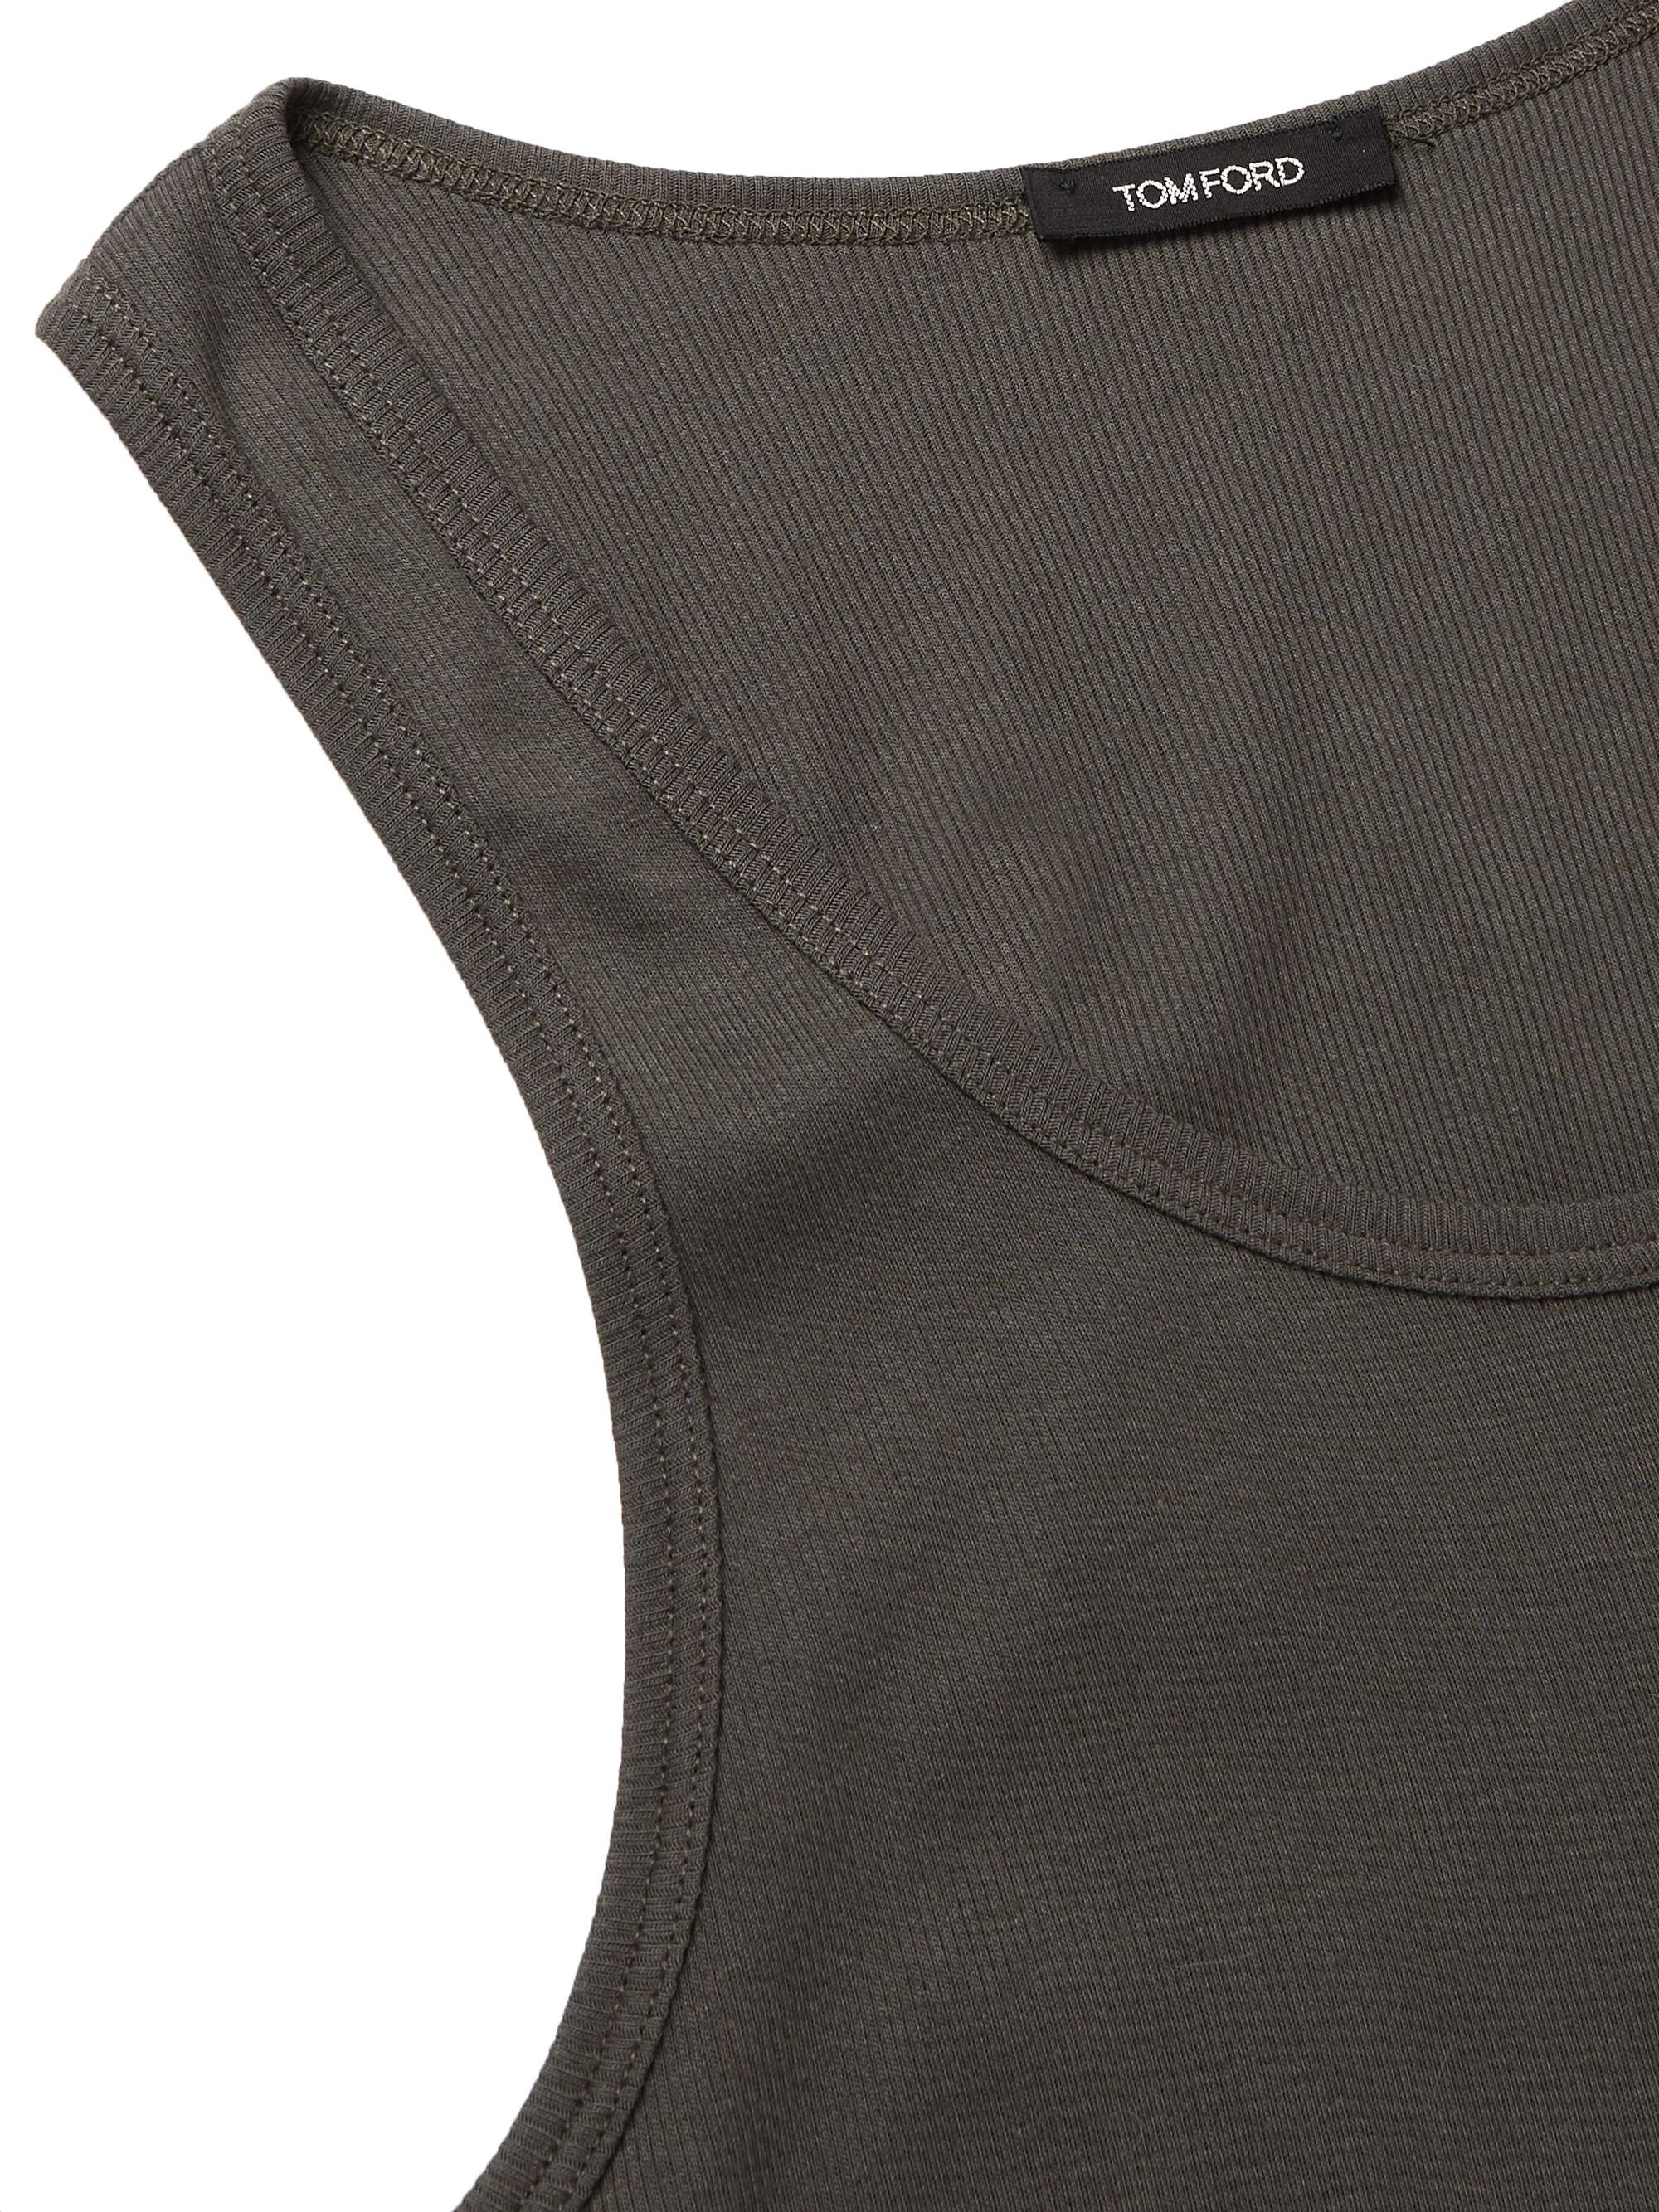 TOM FORD Ribbed Cotton and Modal-Blend Jersey Tank Top